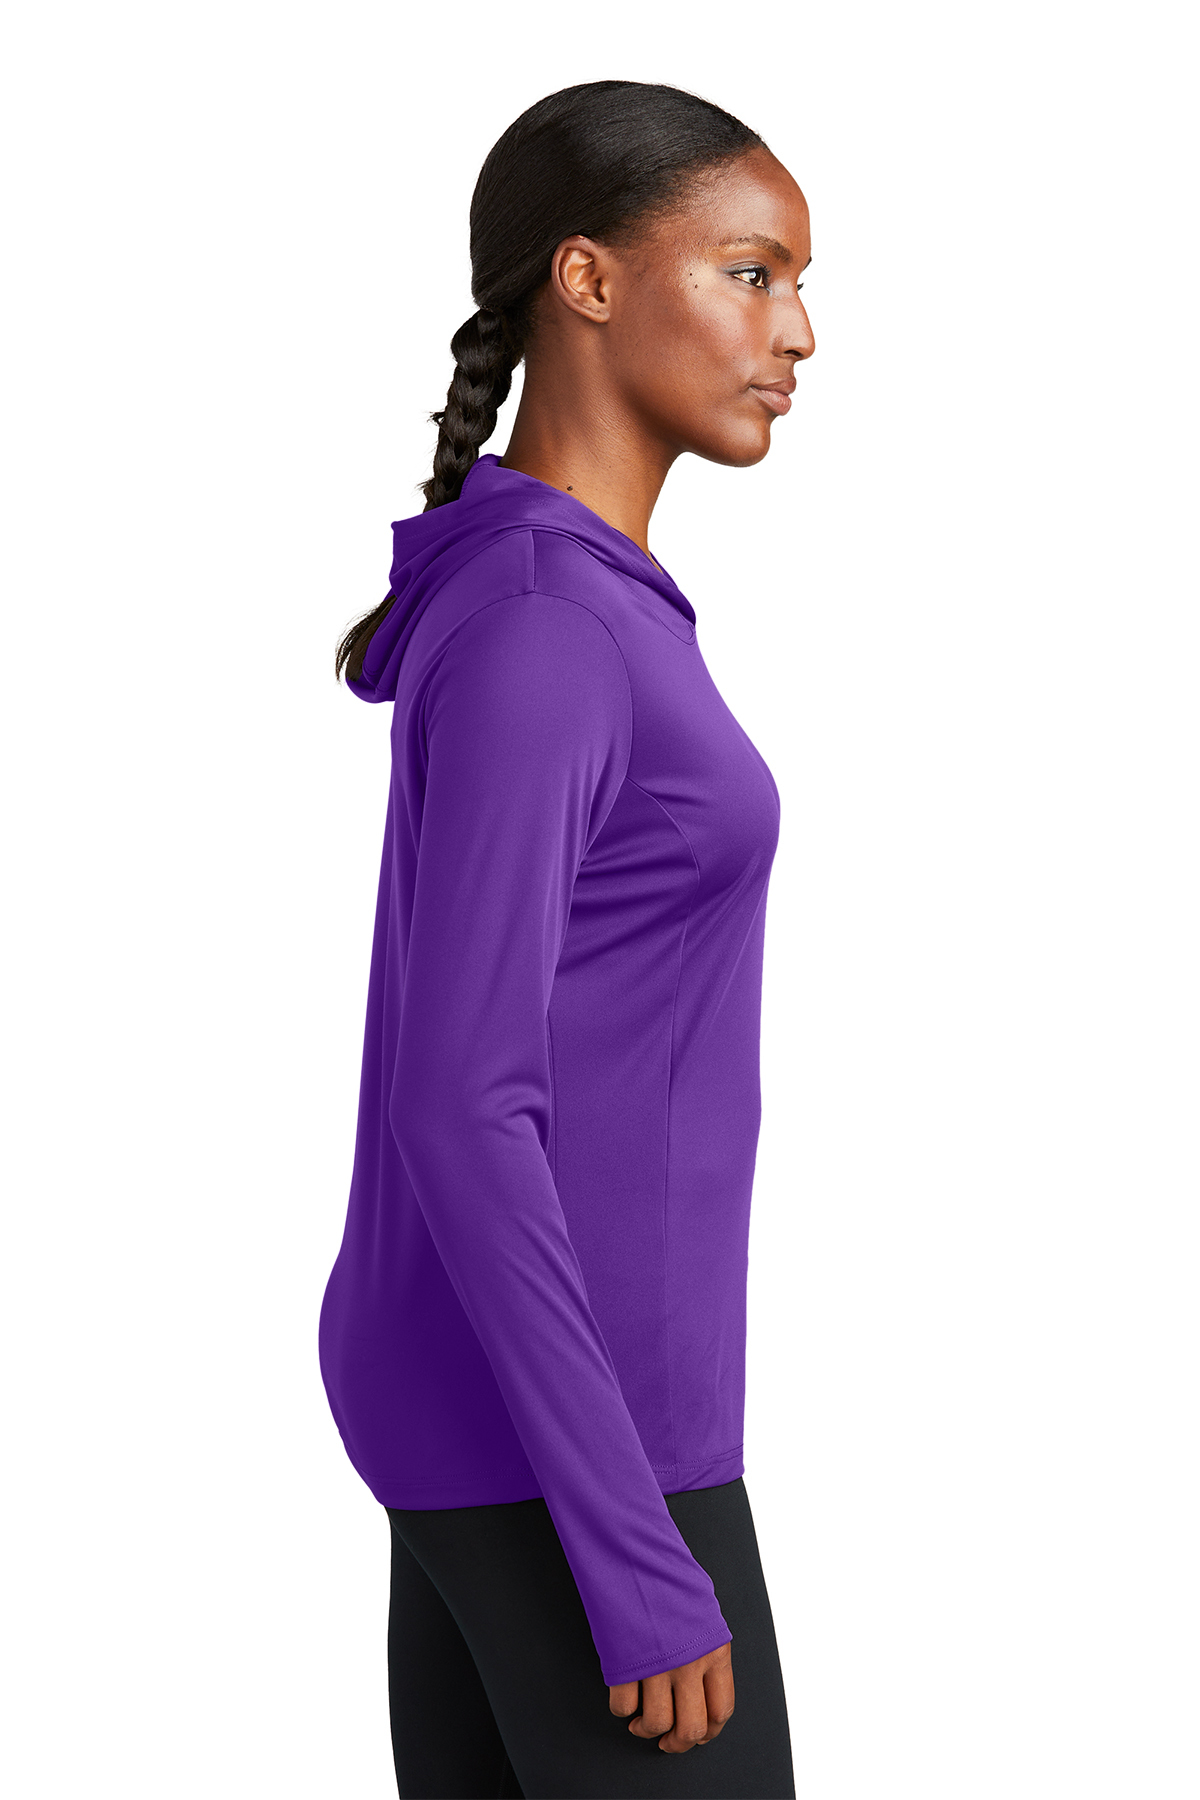 Sport-Tek Ladies PosiCharge Competitor Hooded Pullover | Product ...